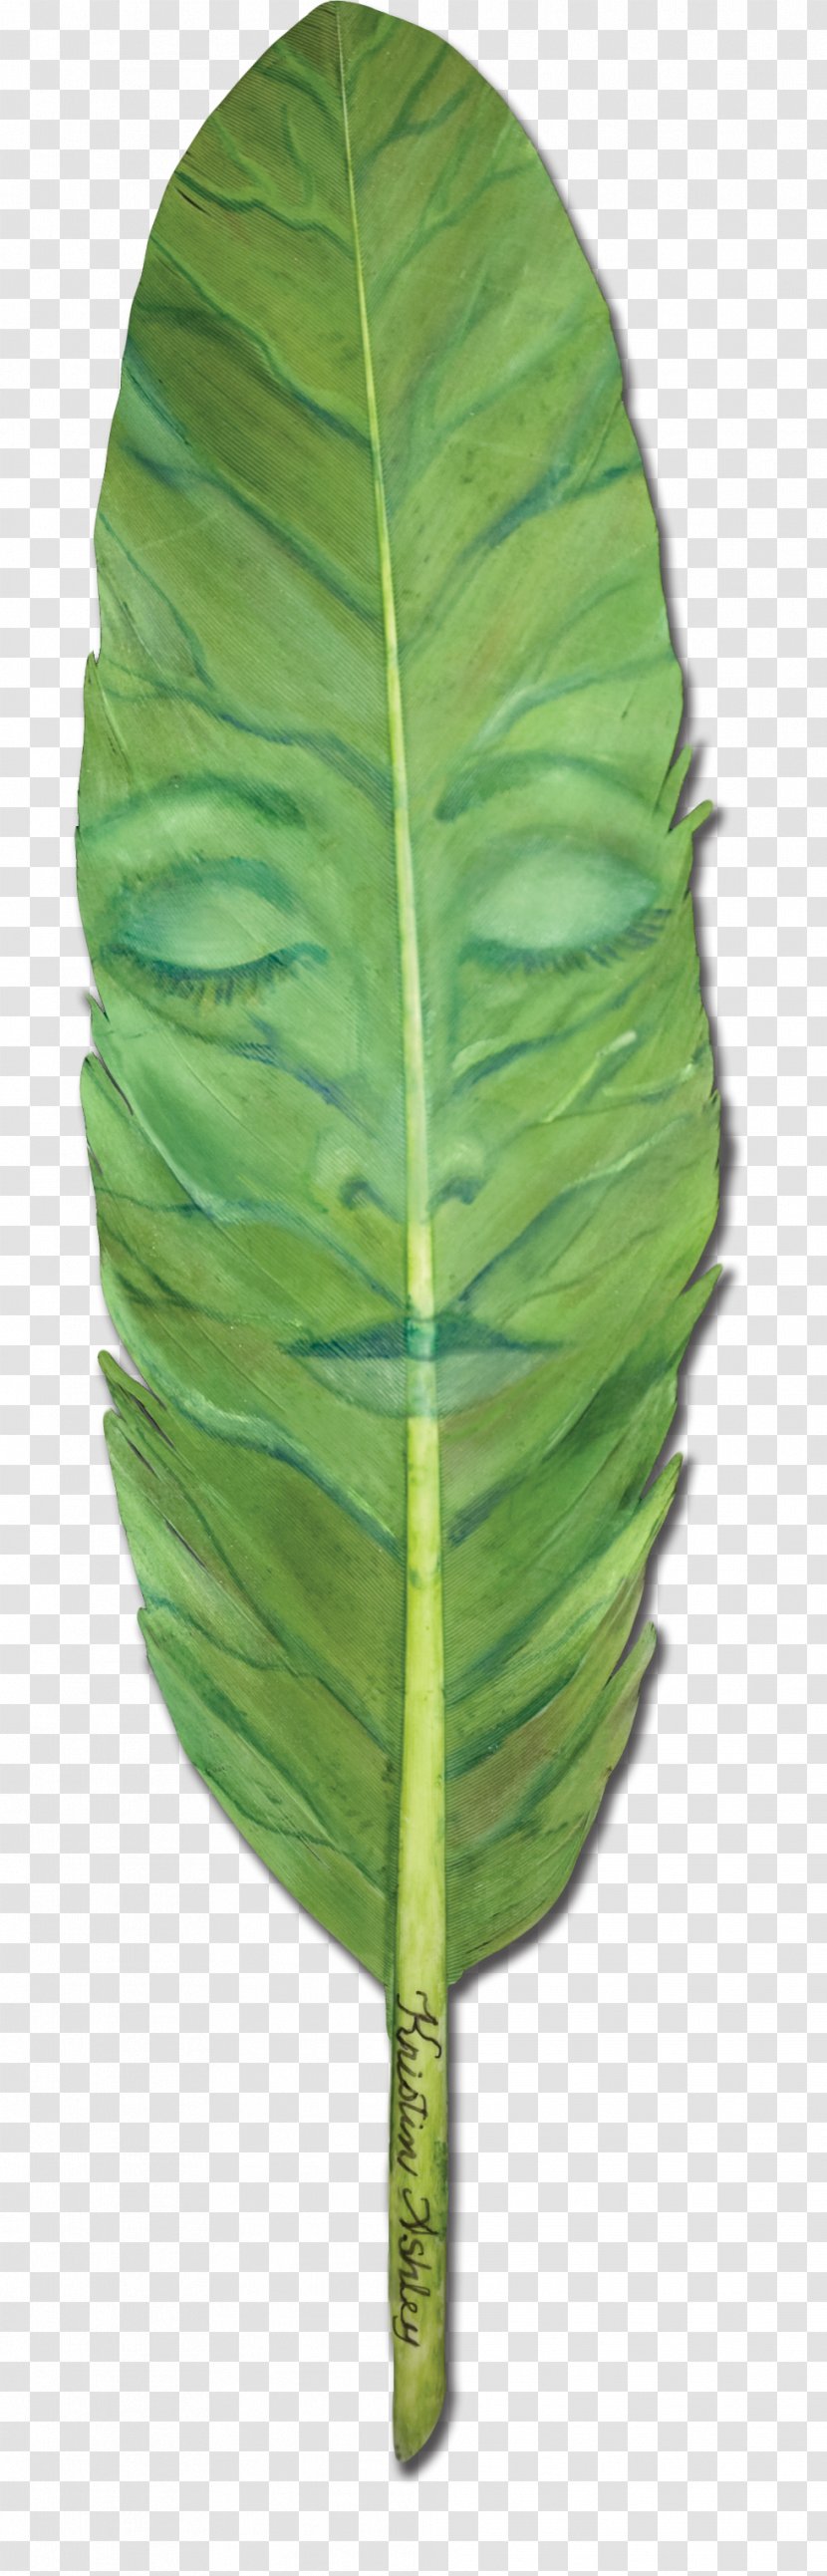 Leaf All Rights Reserved Email Plant Stem - Feather Transparent PNG